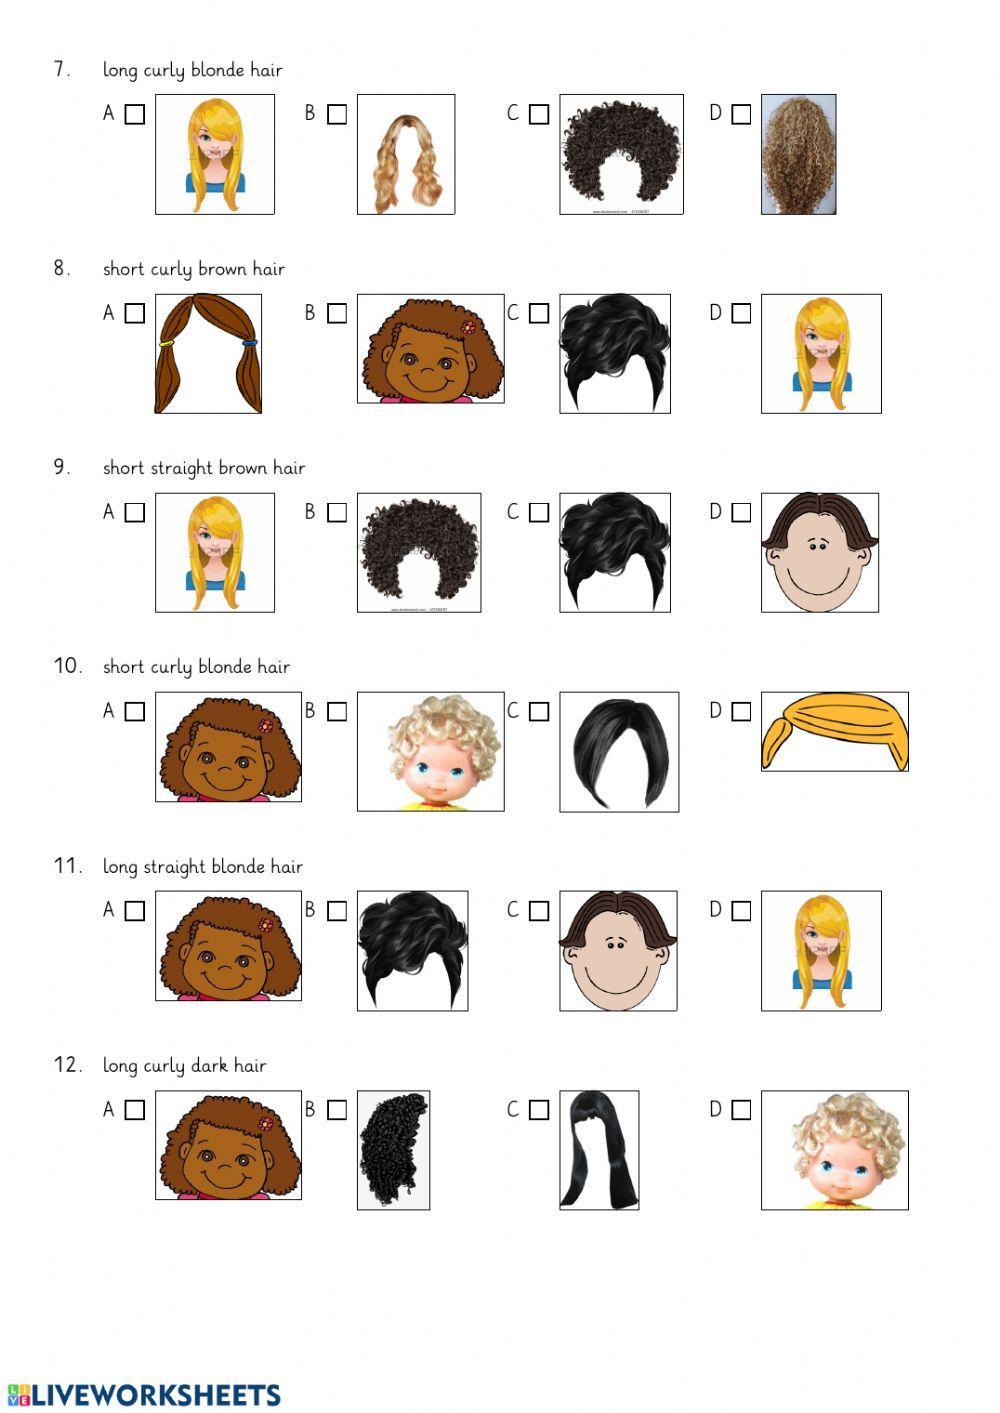 4.9.My Friends-Quiz about hair types